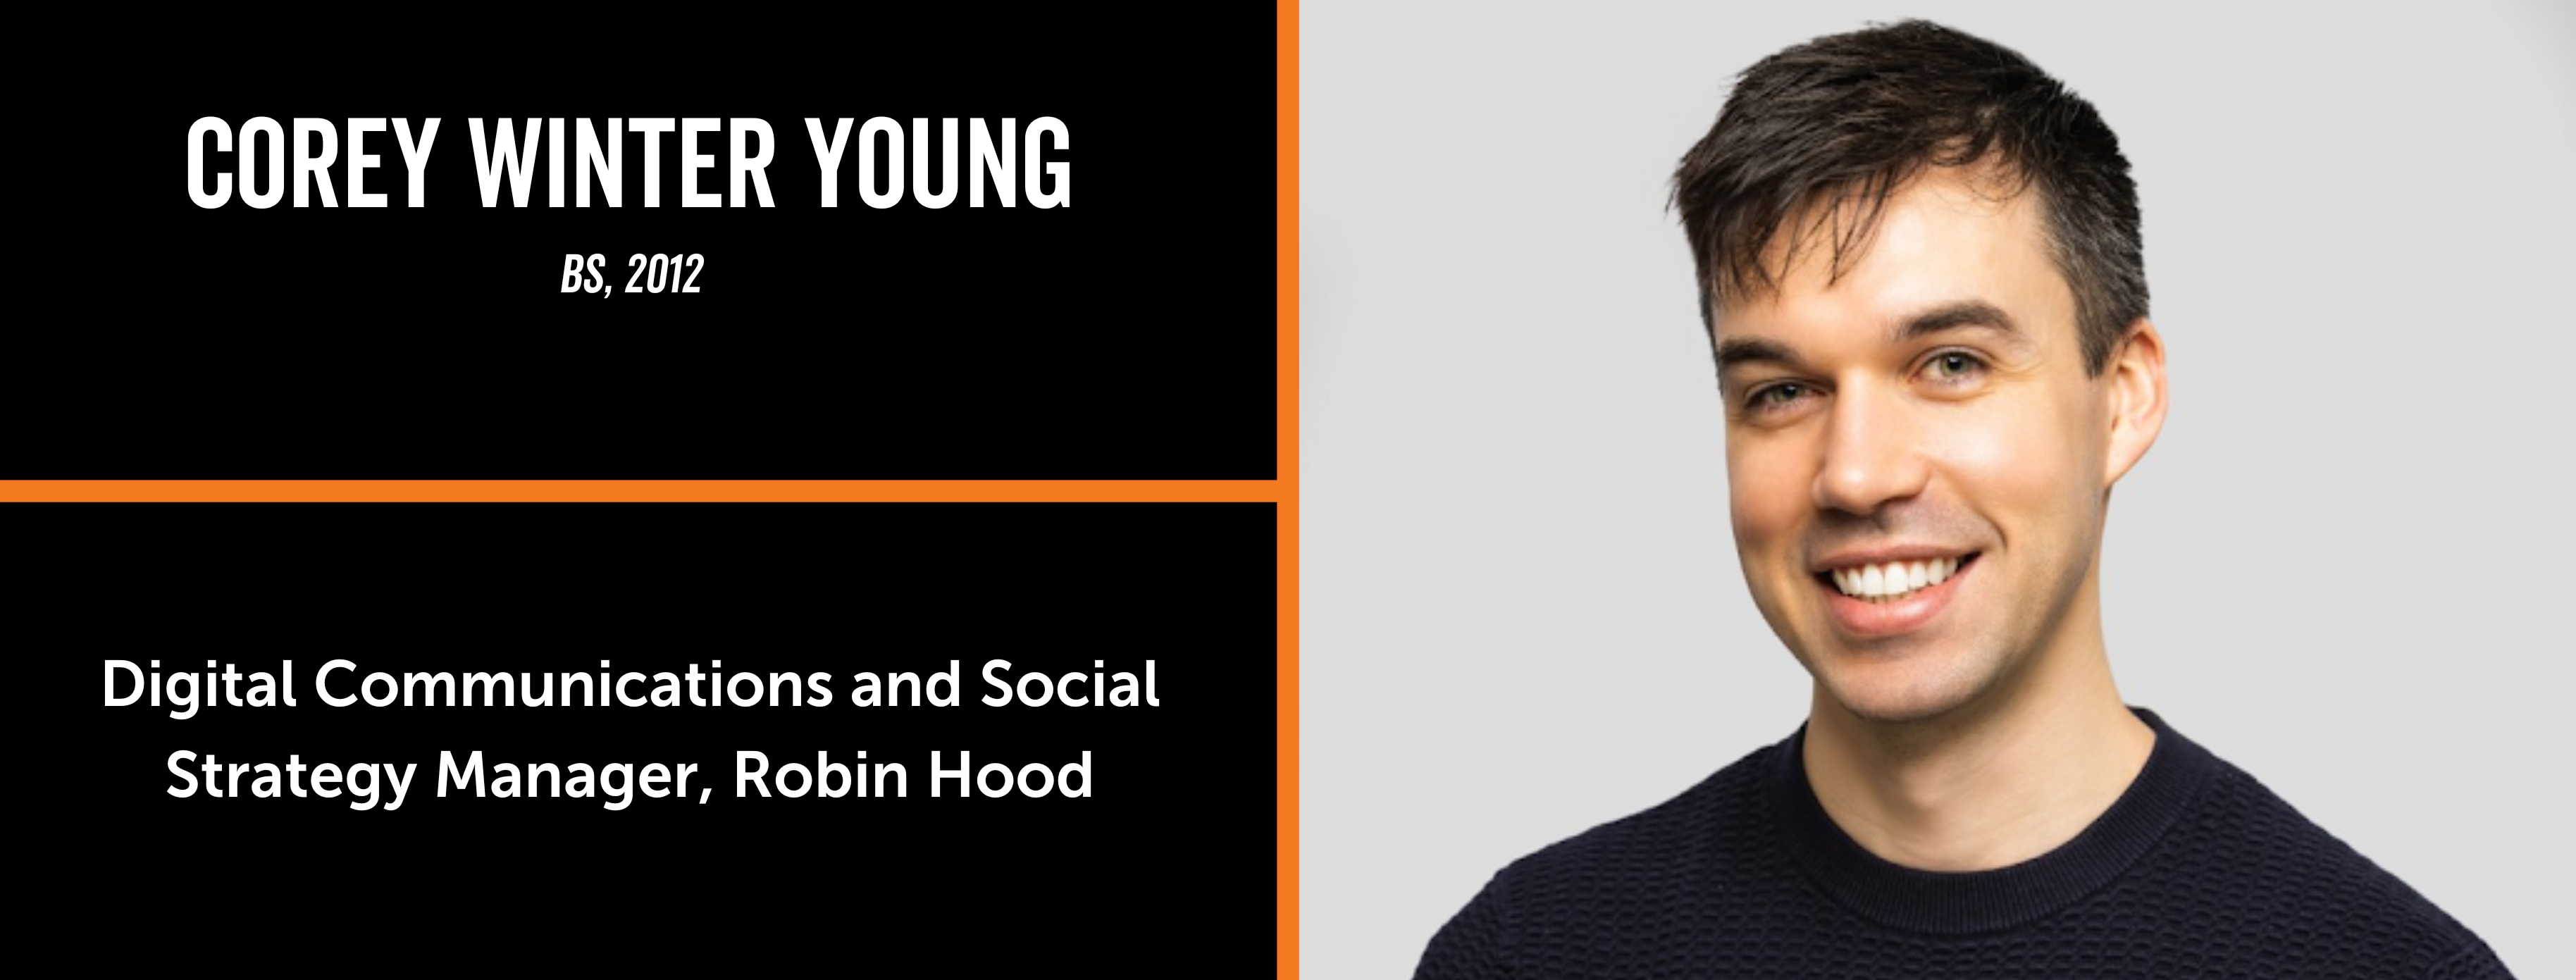 Political Science alumn Corey Winter Young, BS 2012, Digital communications and social strategy manager for Robin Hood